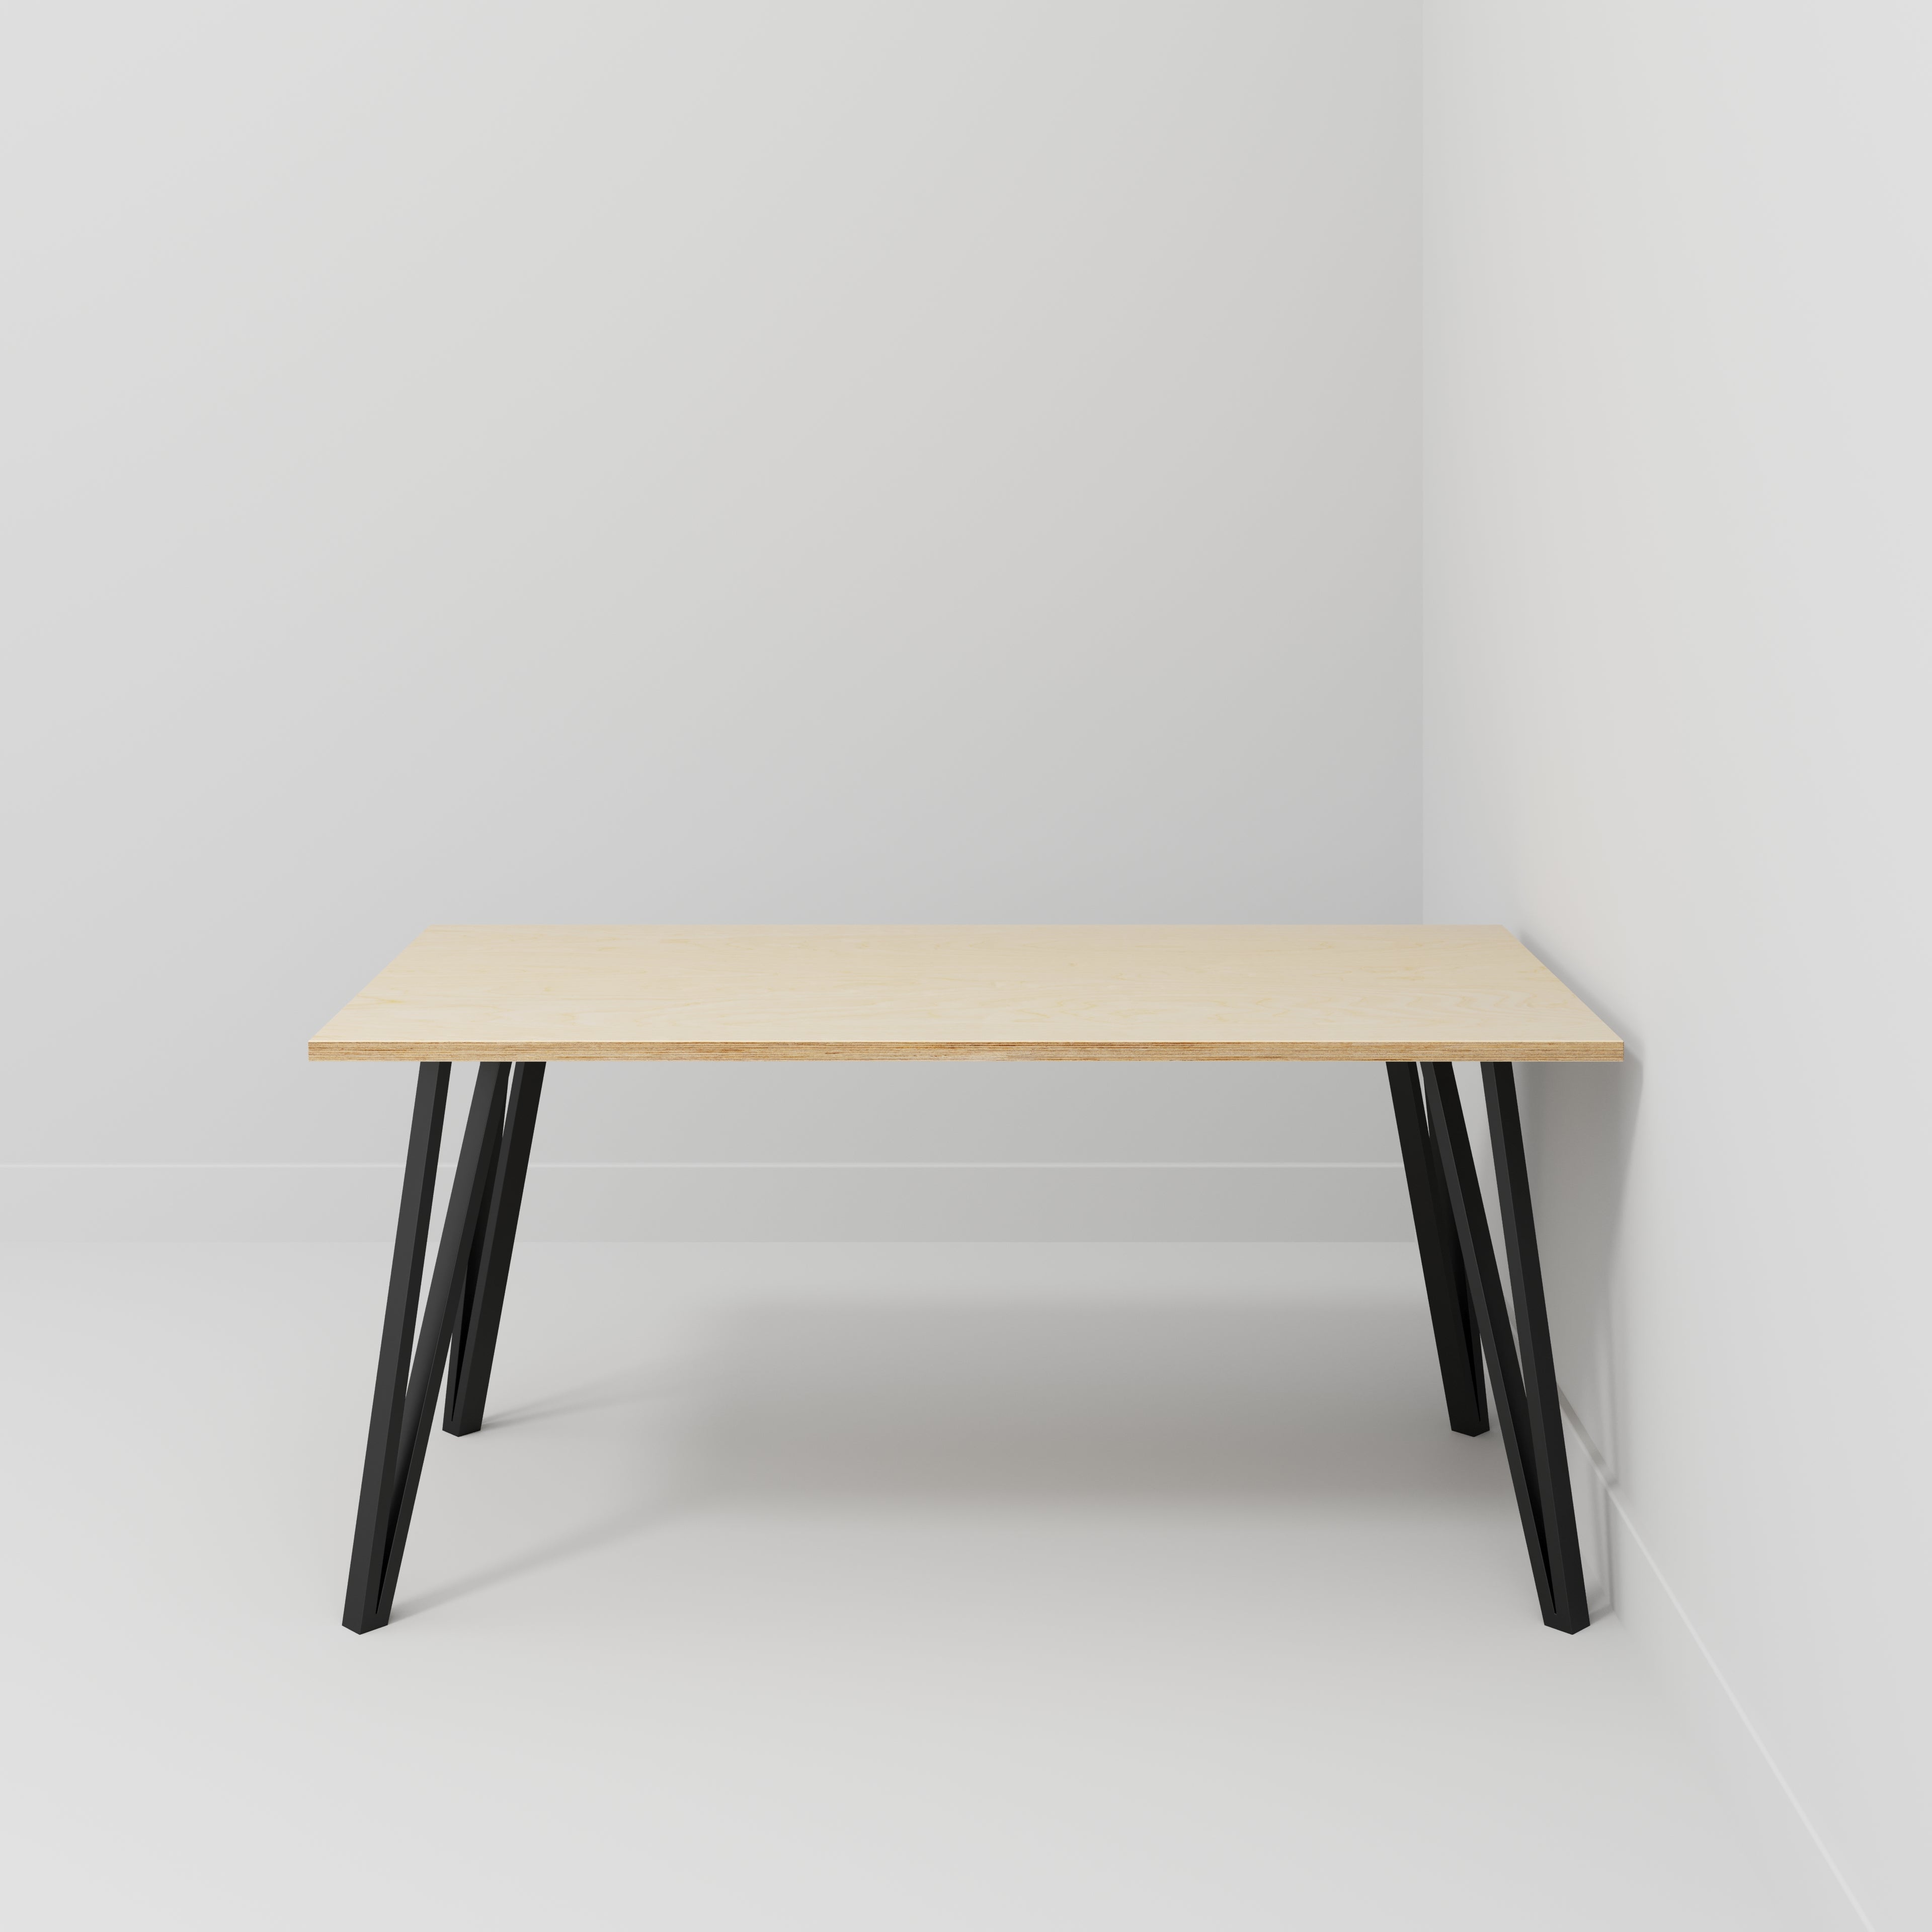 Custom Plywood Table with Box Hairpin Legs